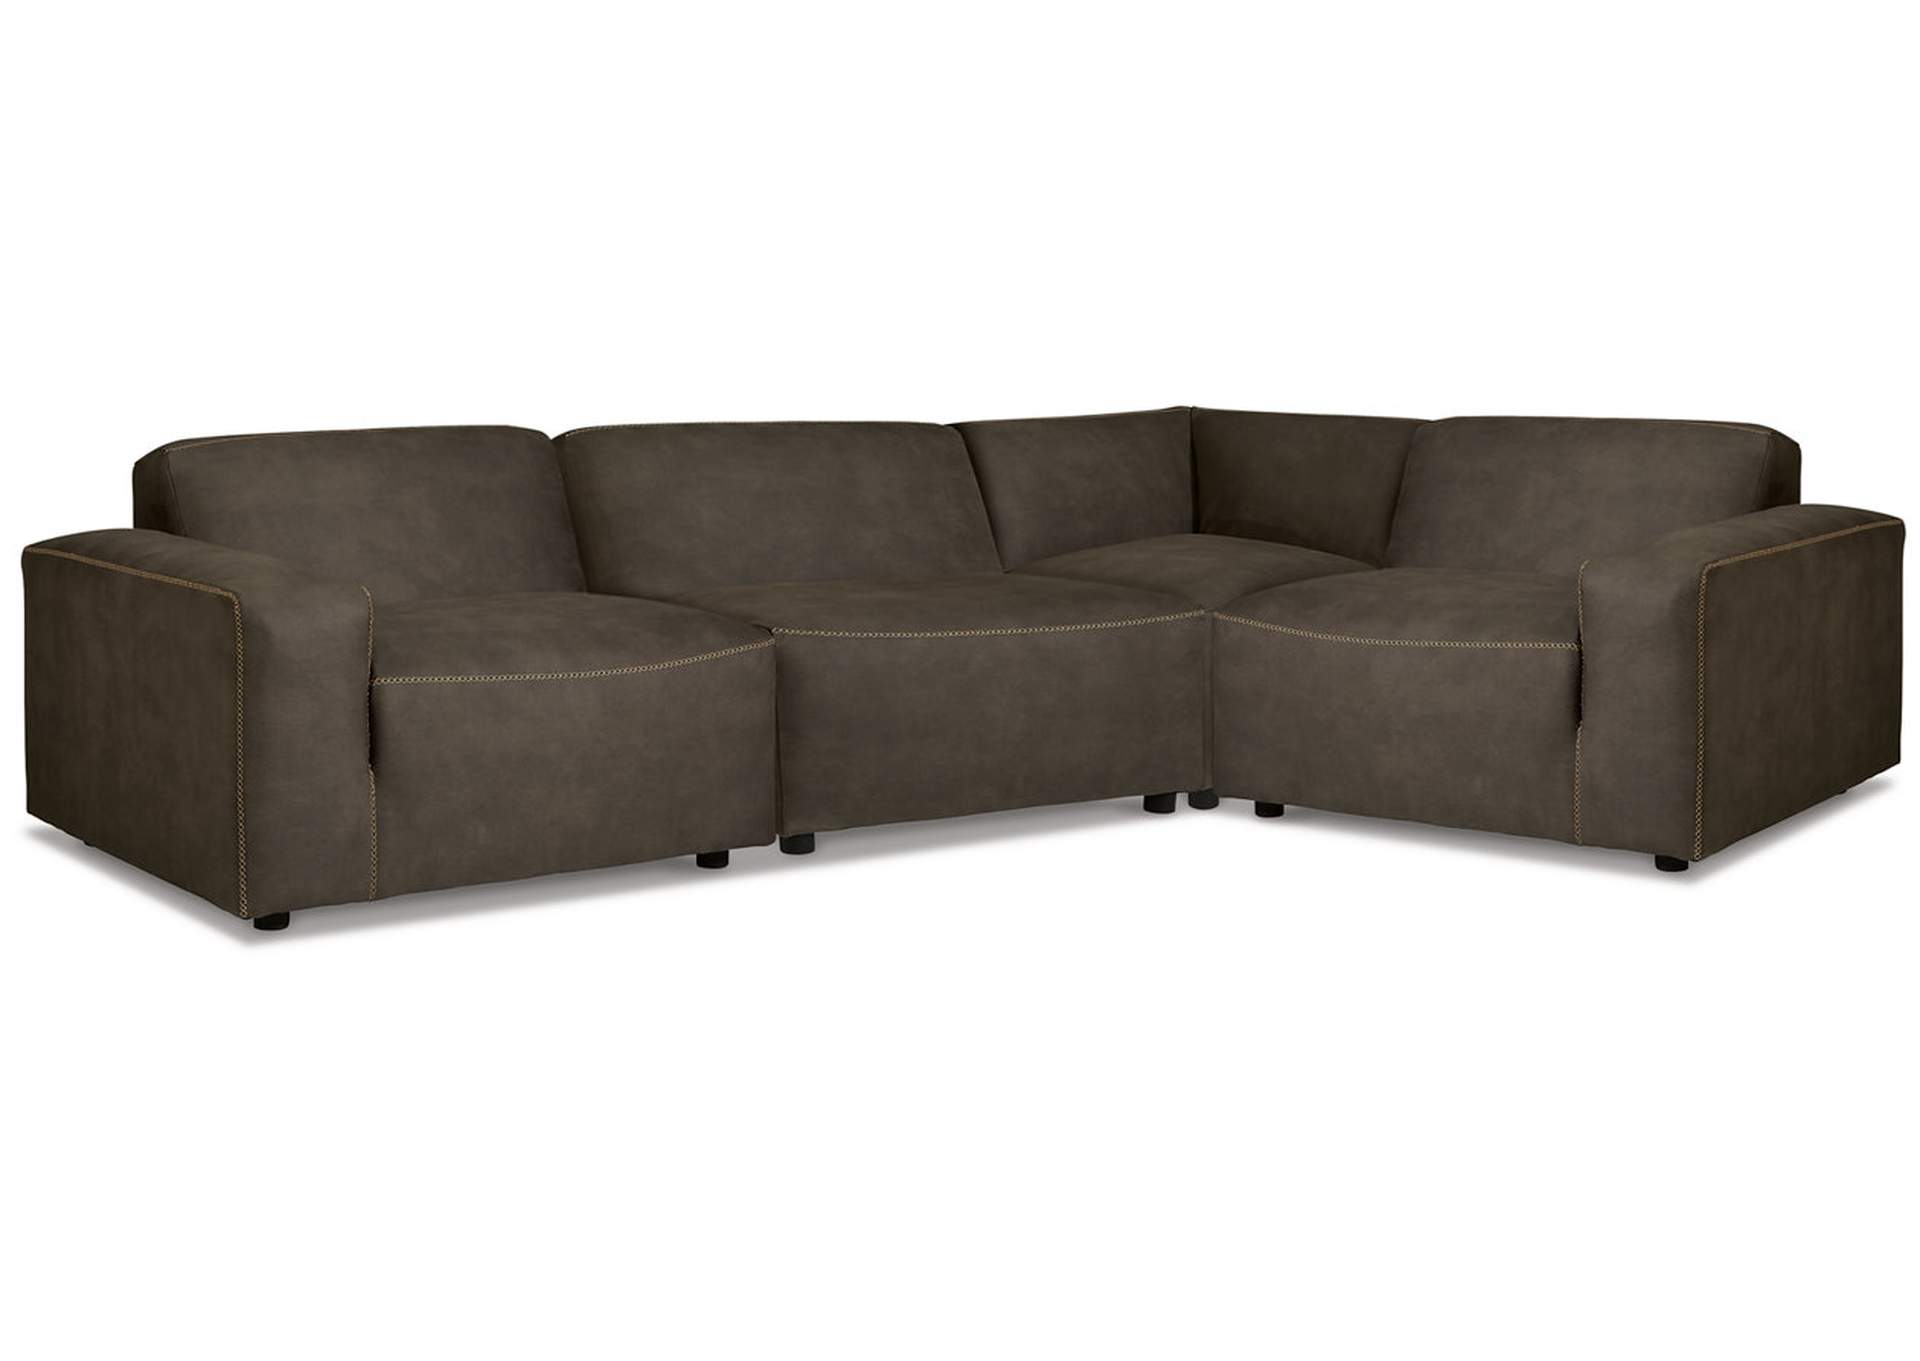 Allena 4-Piece Sectional with Ottoman,Signature Design By Ashley